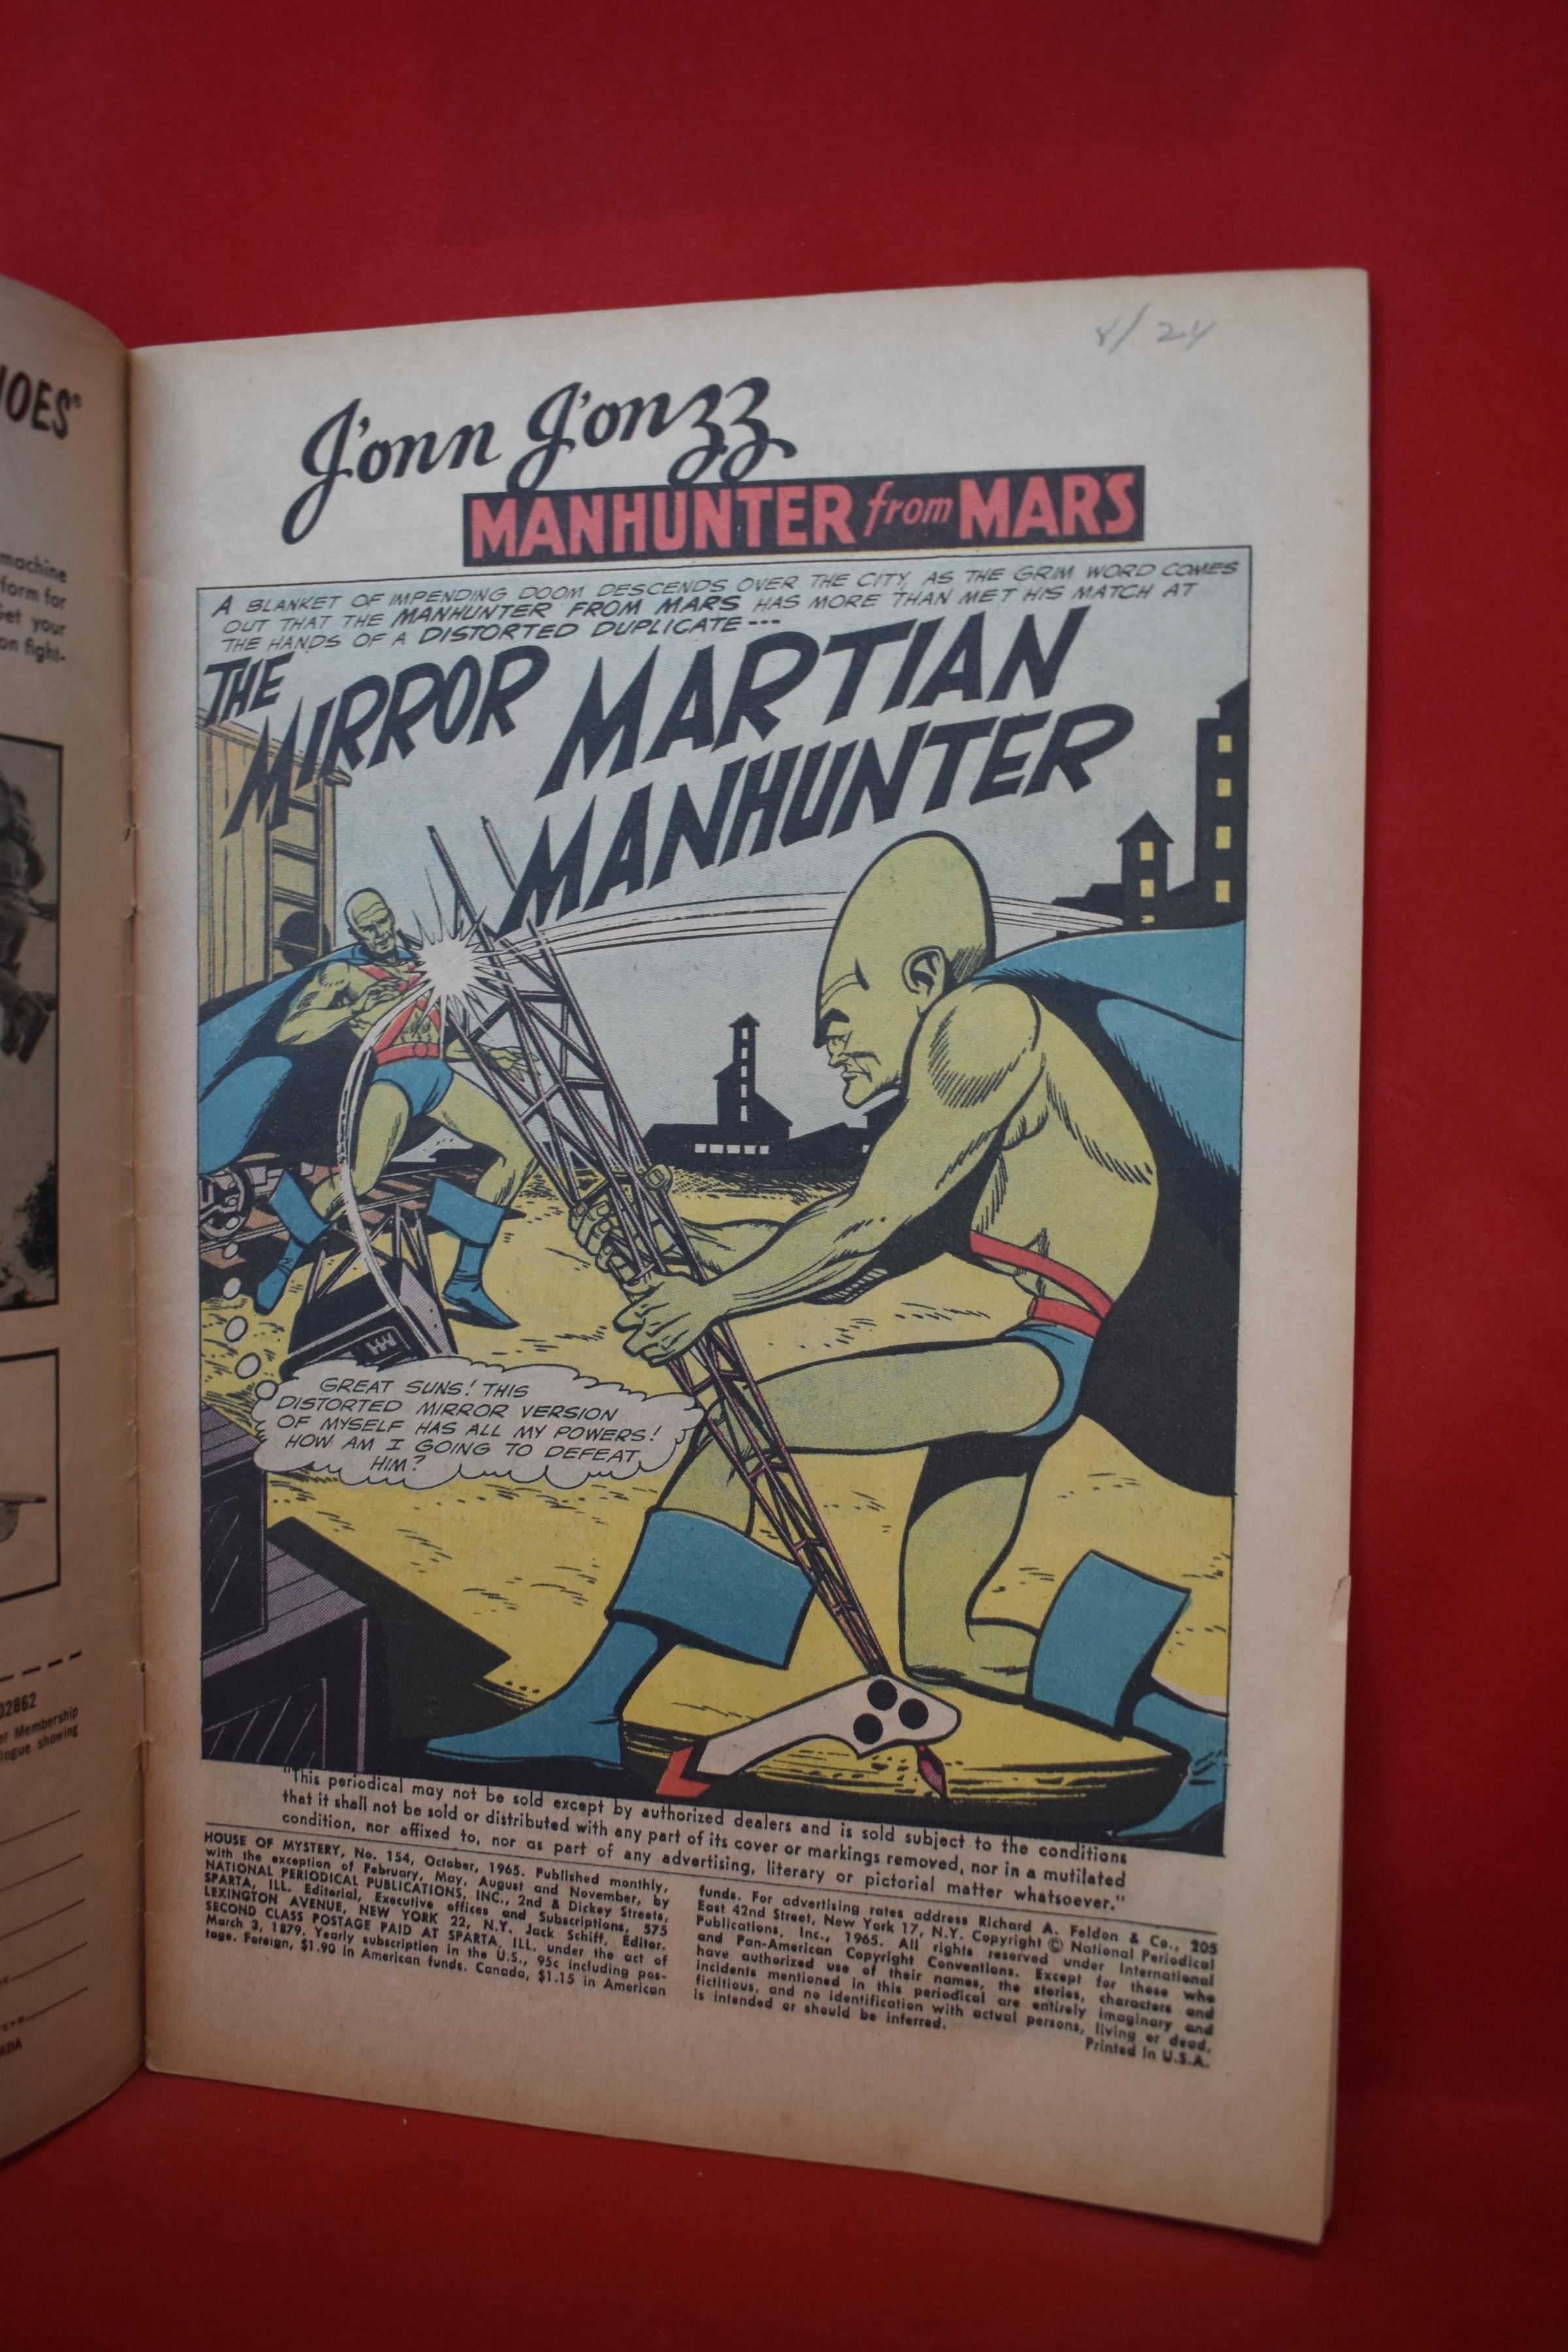 HOUSE OF MYSTERY #154 | MARTIAN MANHUNTER - JACK SPARLING - 1965 | *TWO CENTERFOLD PAGES DETACHED*